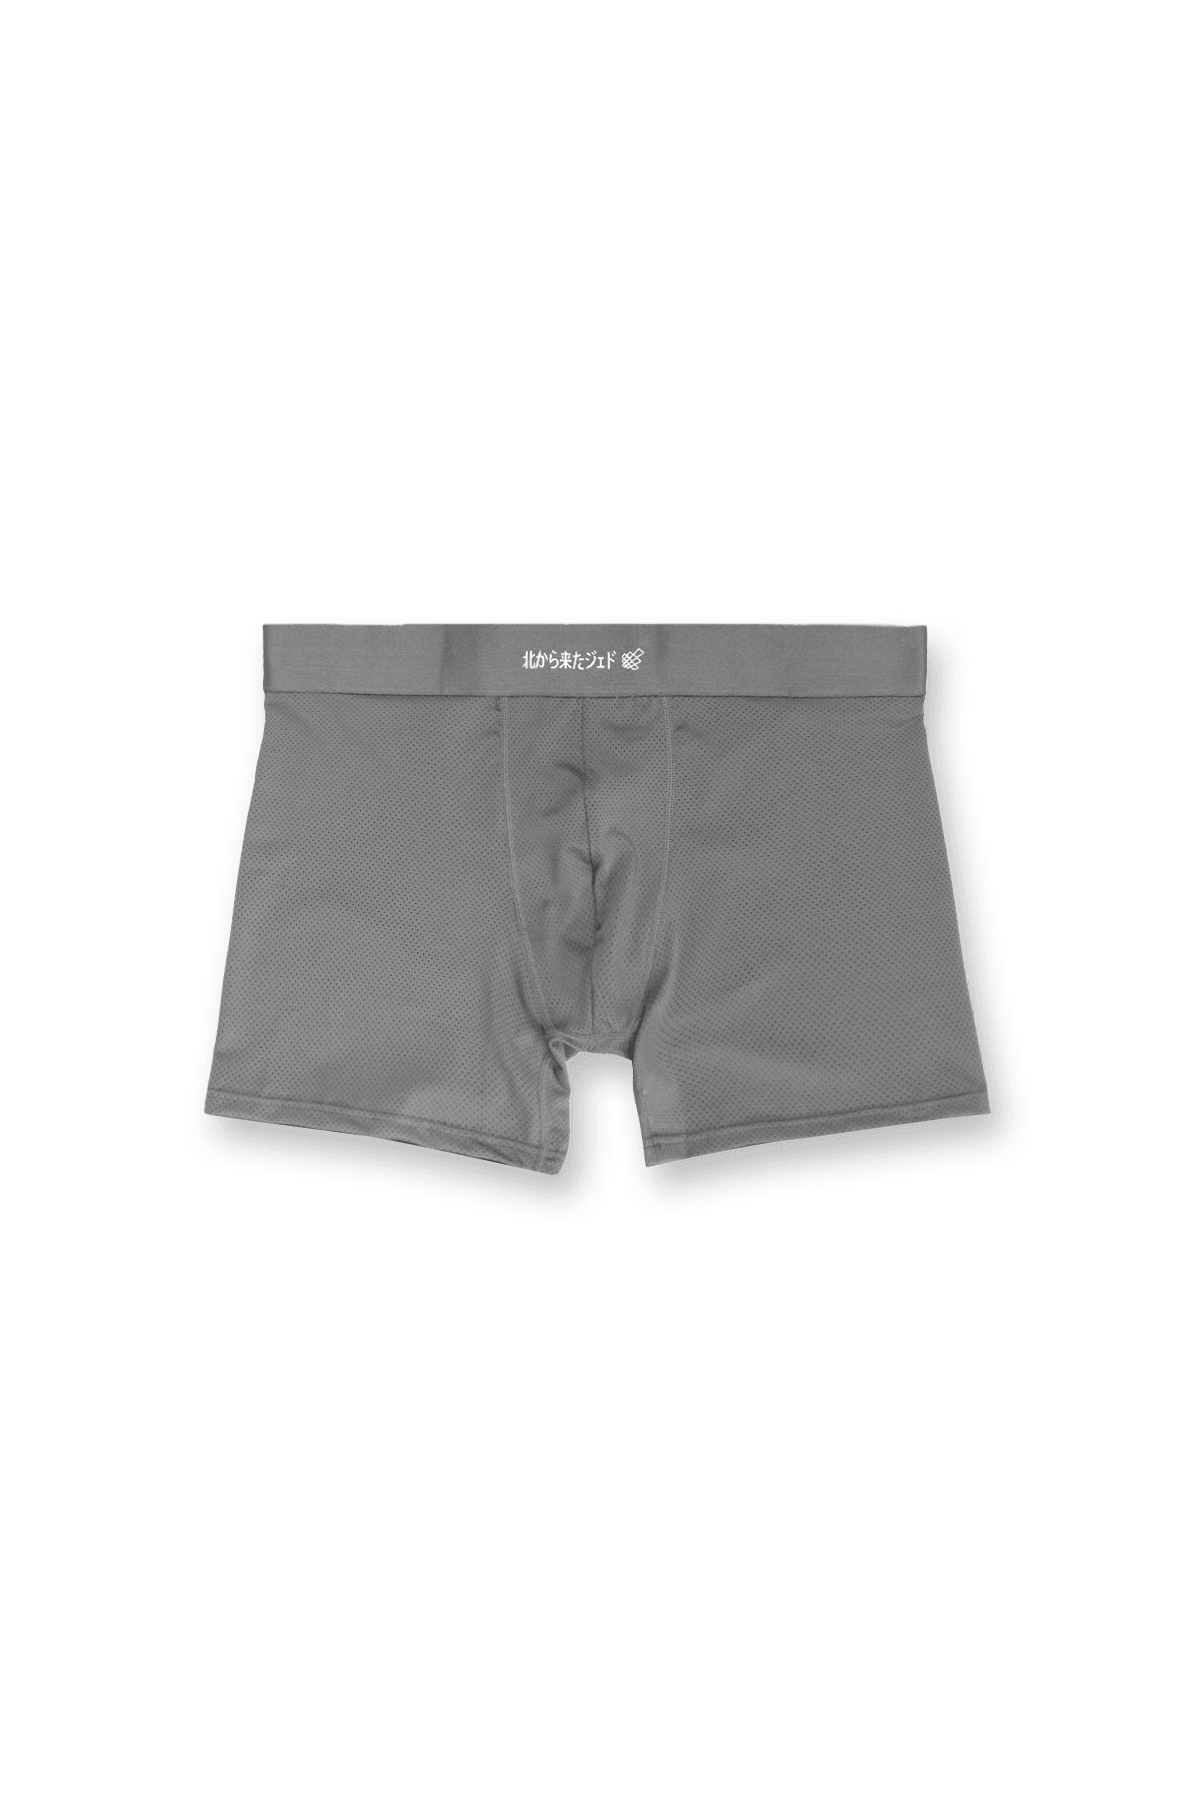 Men's Full Mesh Boxer Briefs 2 Pack - Black and Gray - Jed North